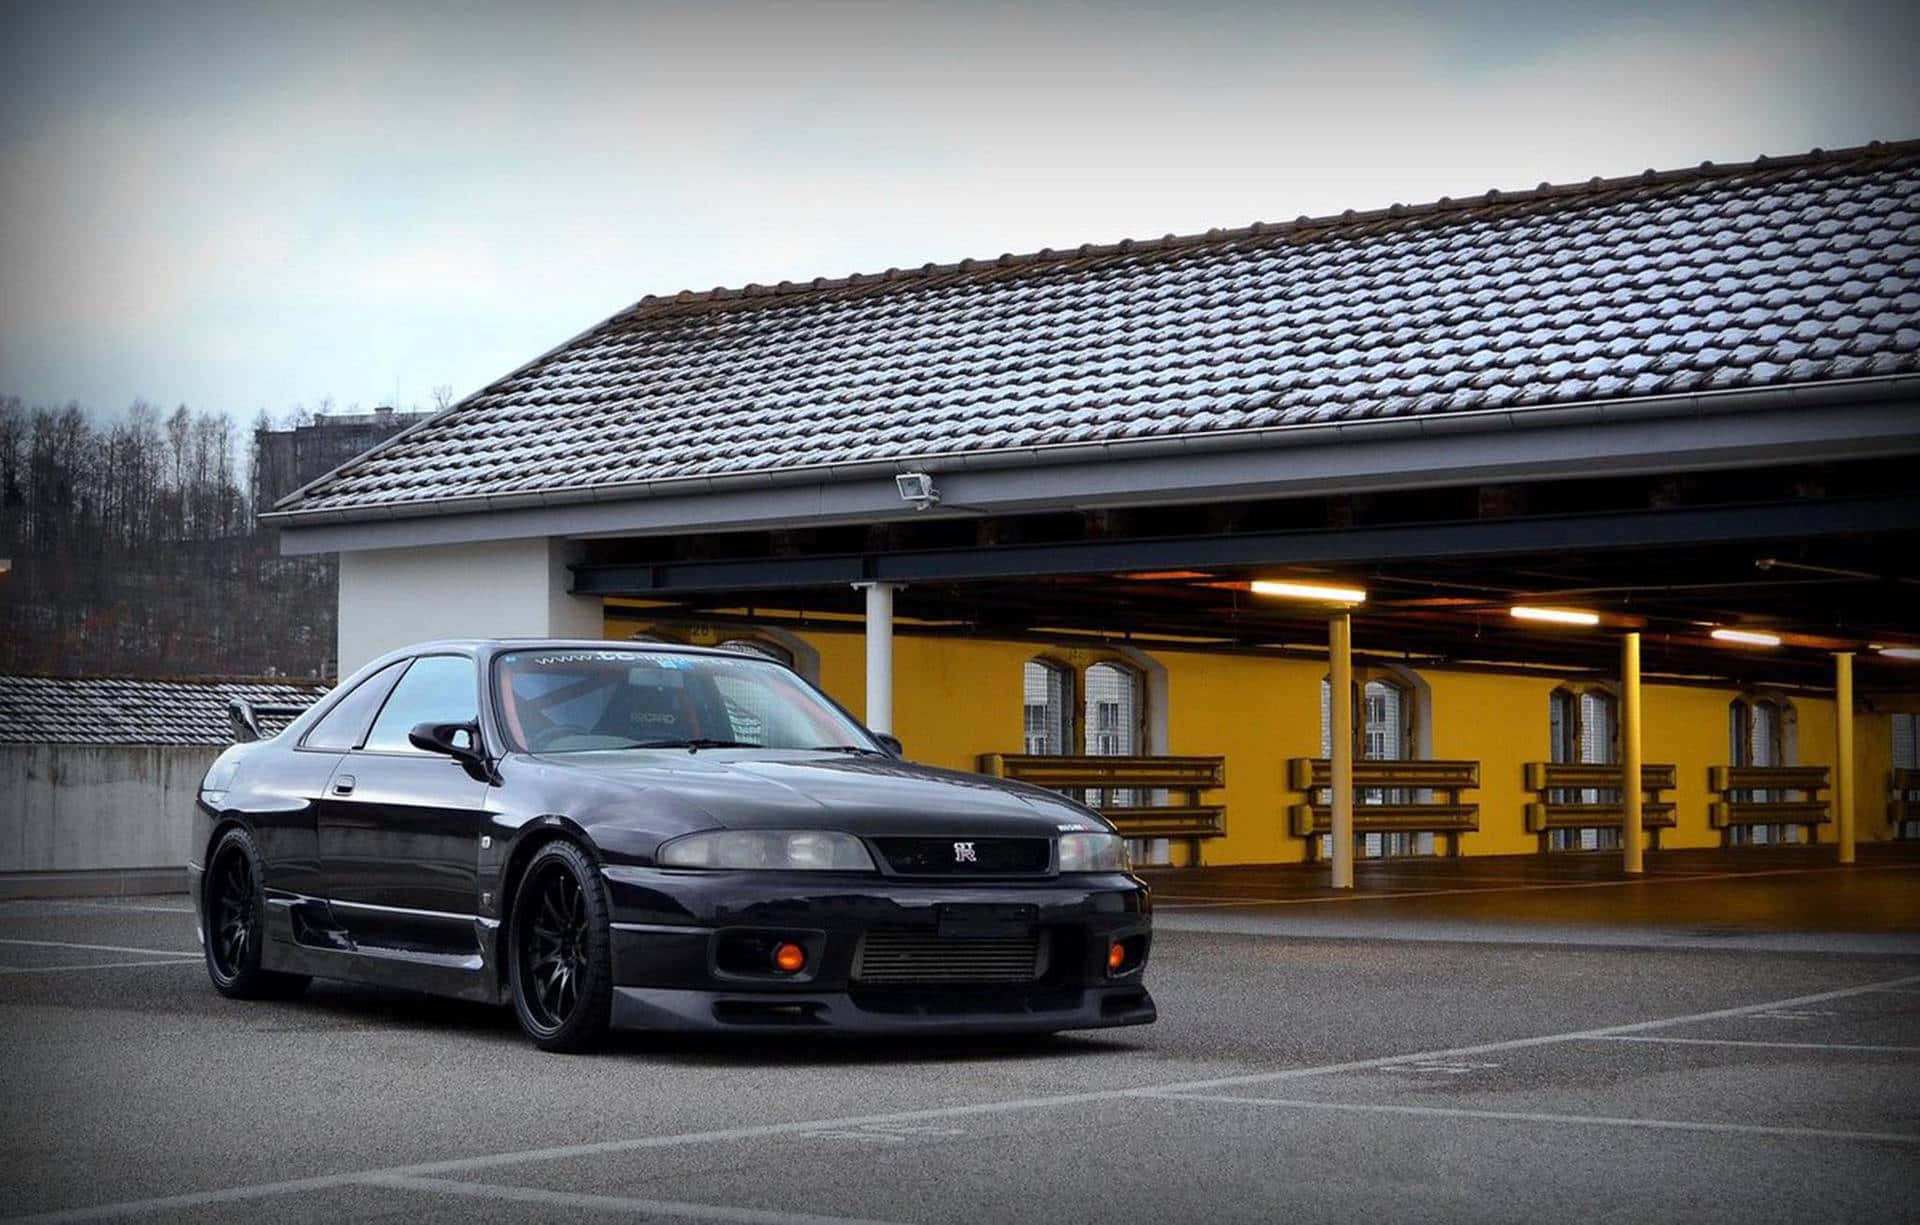 Nissan R33 Gtr And Train Station Wallpaper